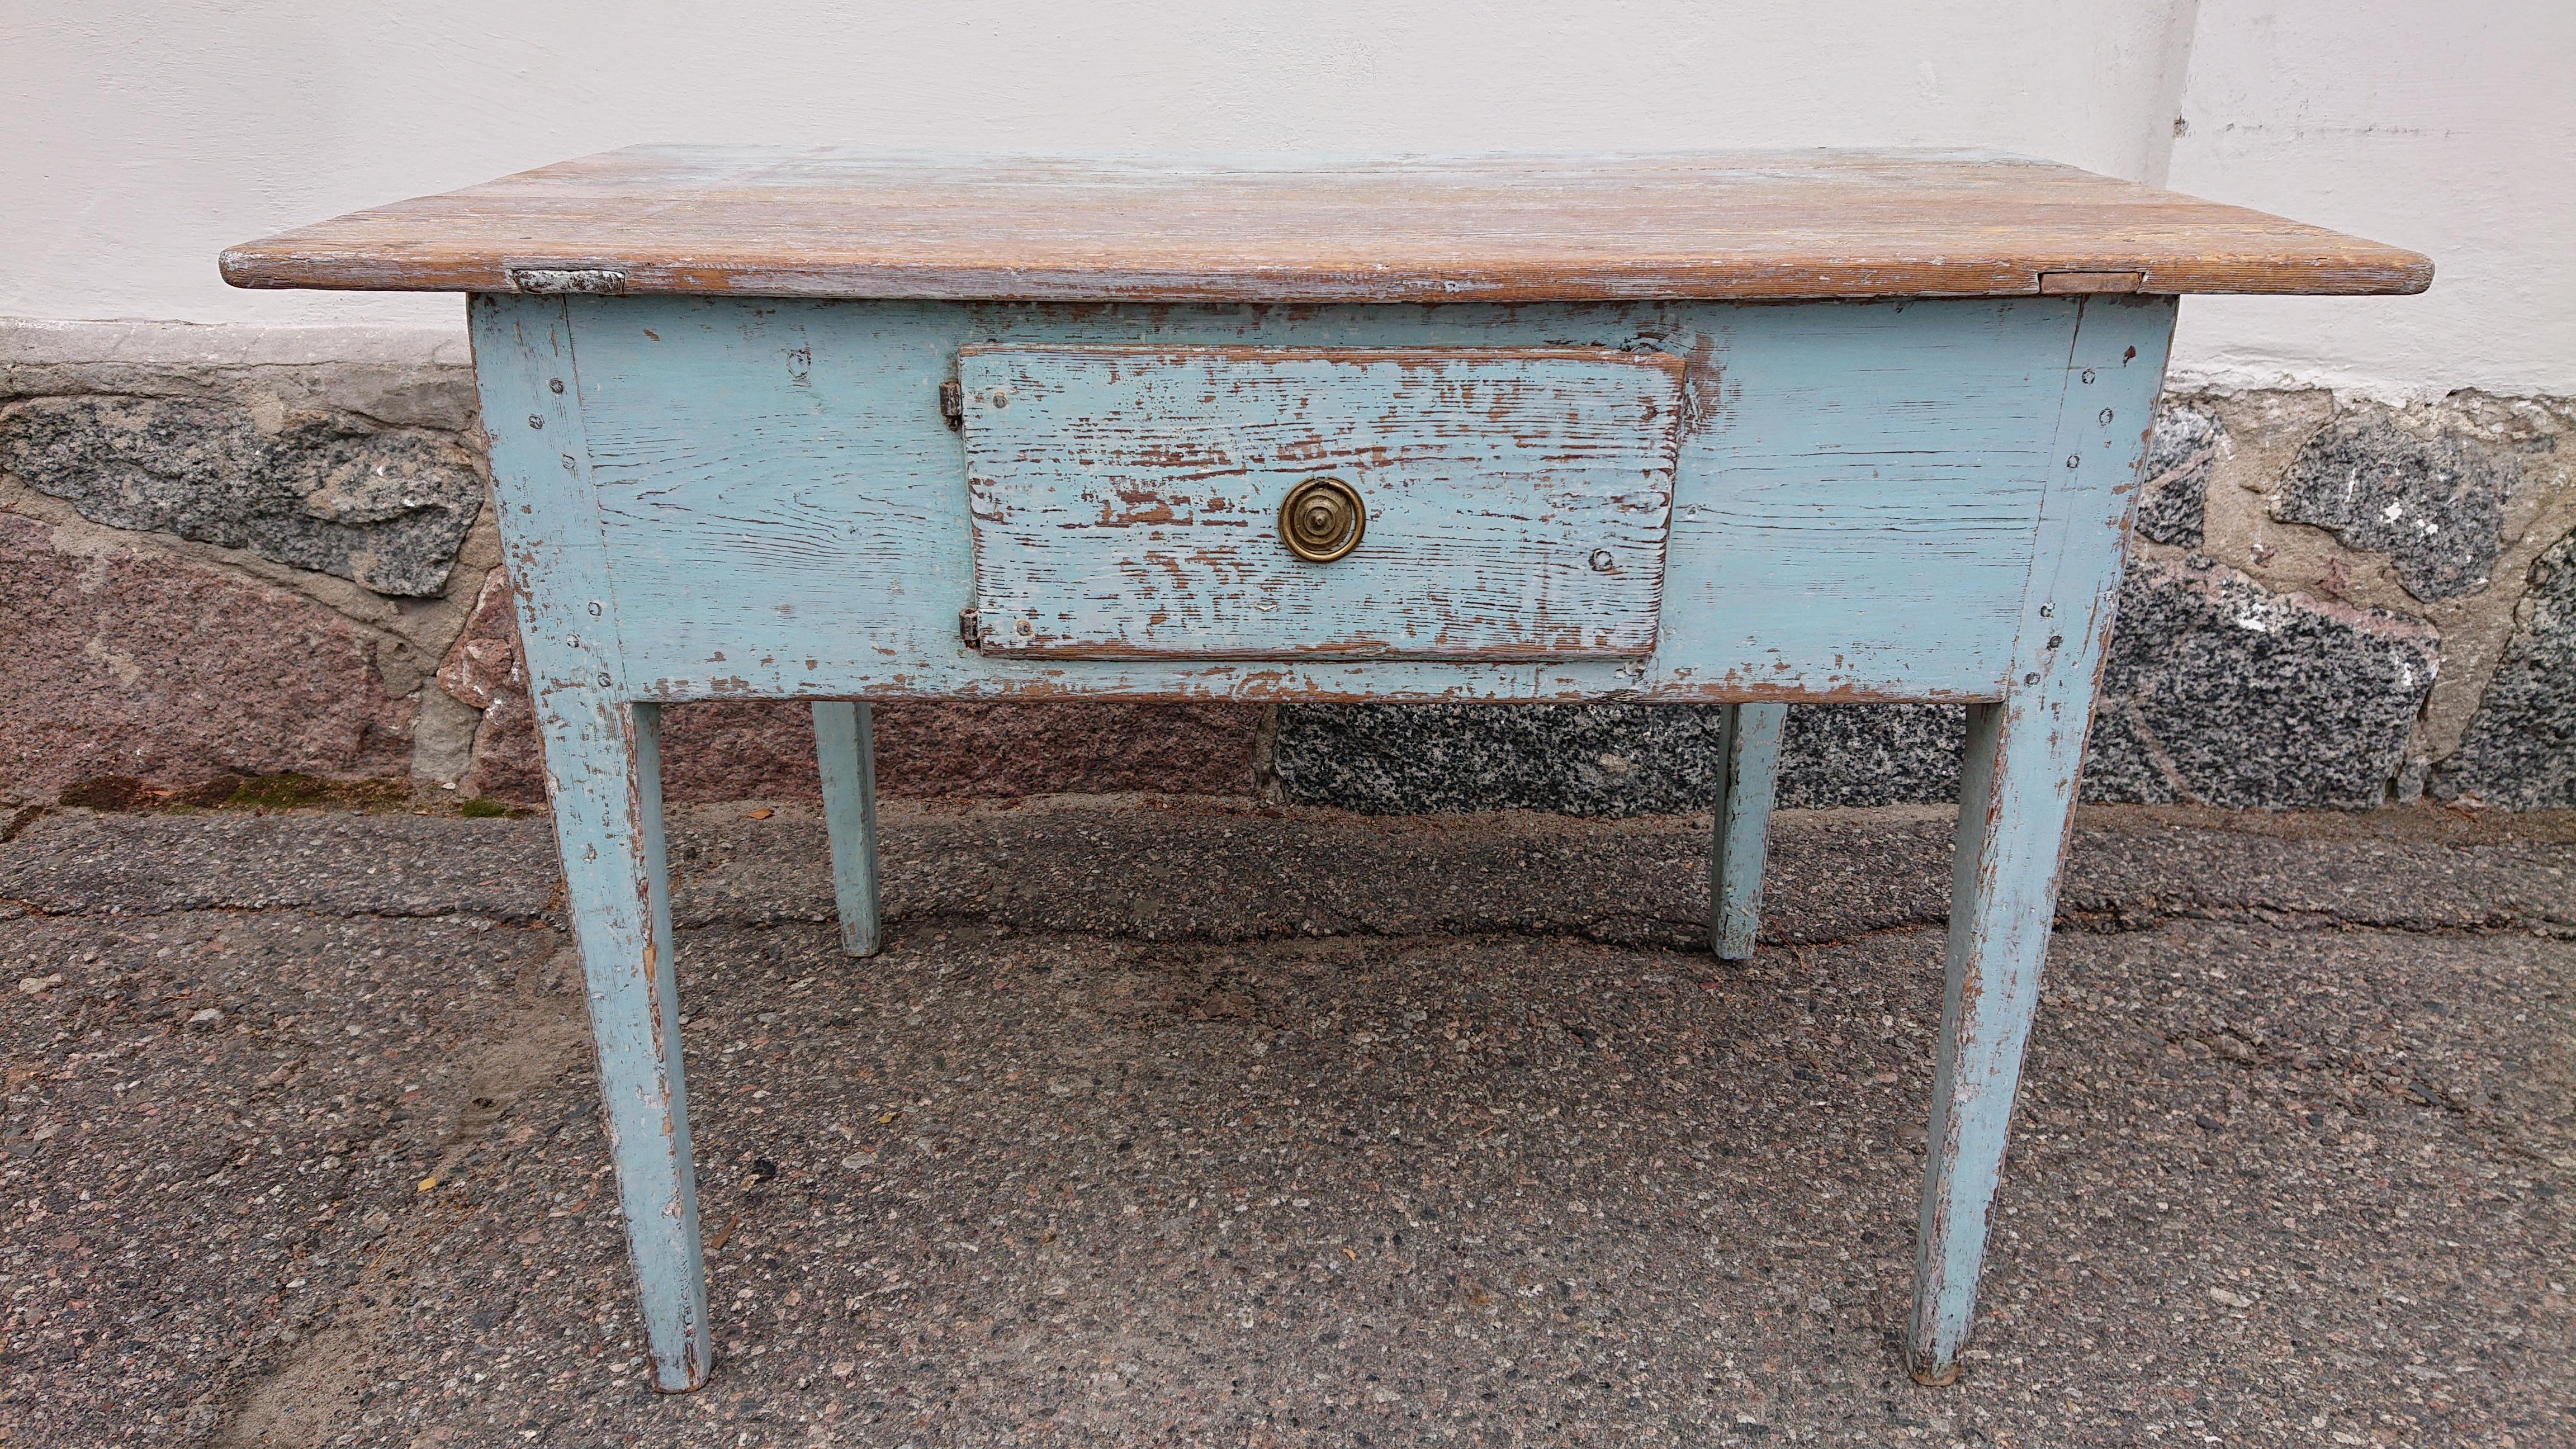 Unusual charming early 19th Centurty Swedish Gustavian desk with a door instead of a drawer.
Nice patina on the desk. 
The desk is scraped by hand to its originalpaint in a lovely blue color.
Original hinges on the door and original